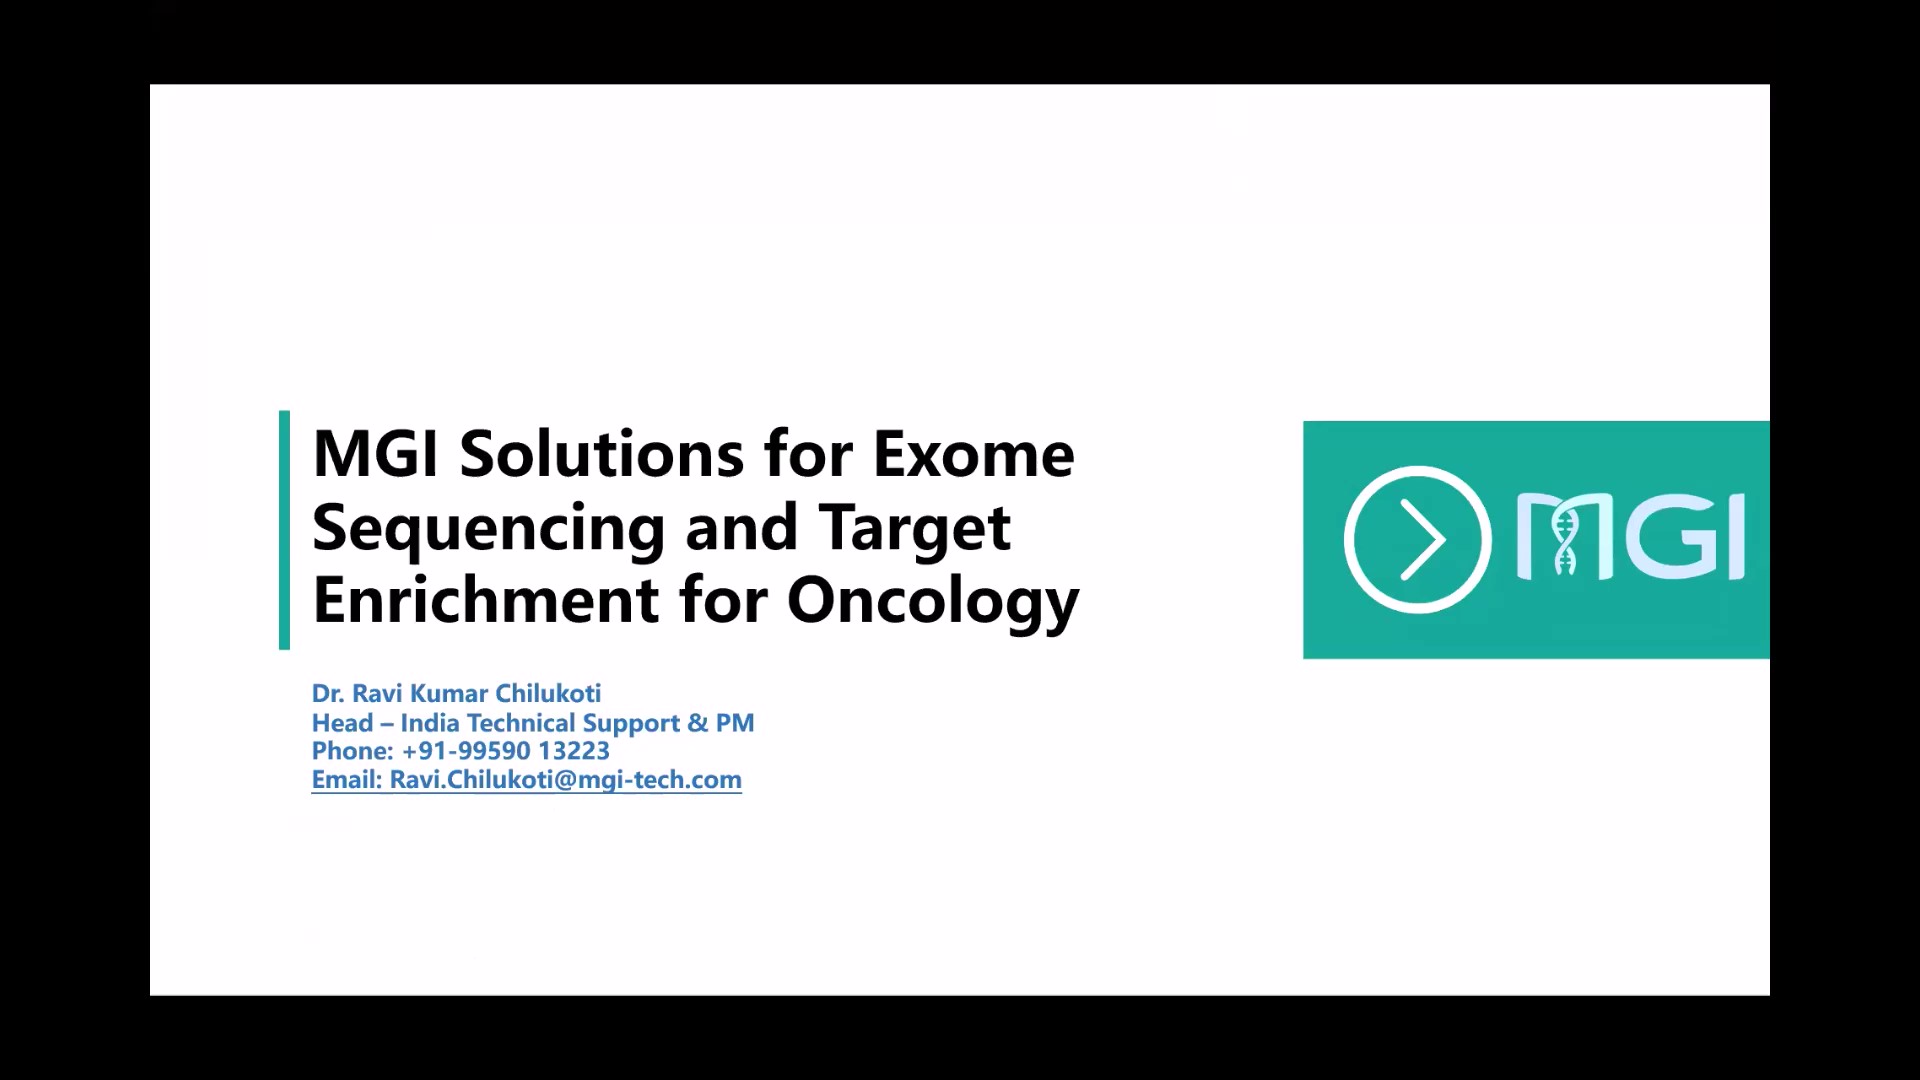 MGI Products for Exome Sequencing and Target Enrichment for Oncology